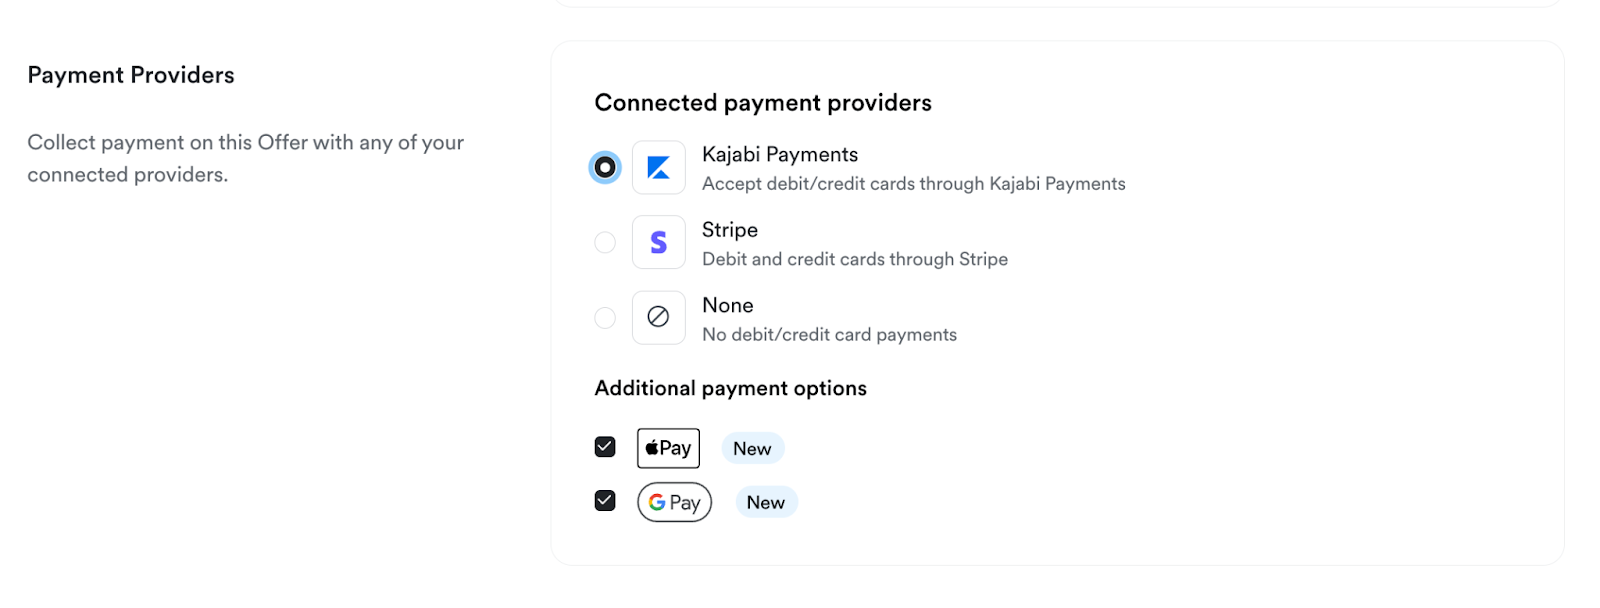 payment-options-available-with-kajabi-google-docs-0.png